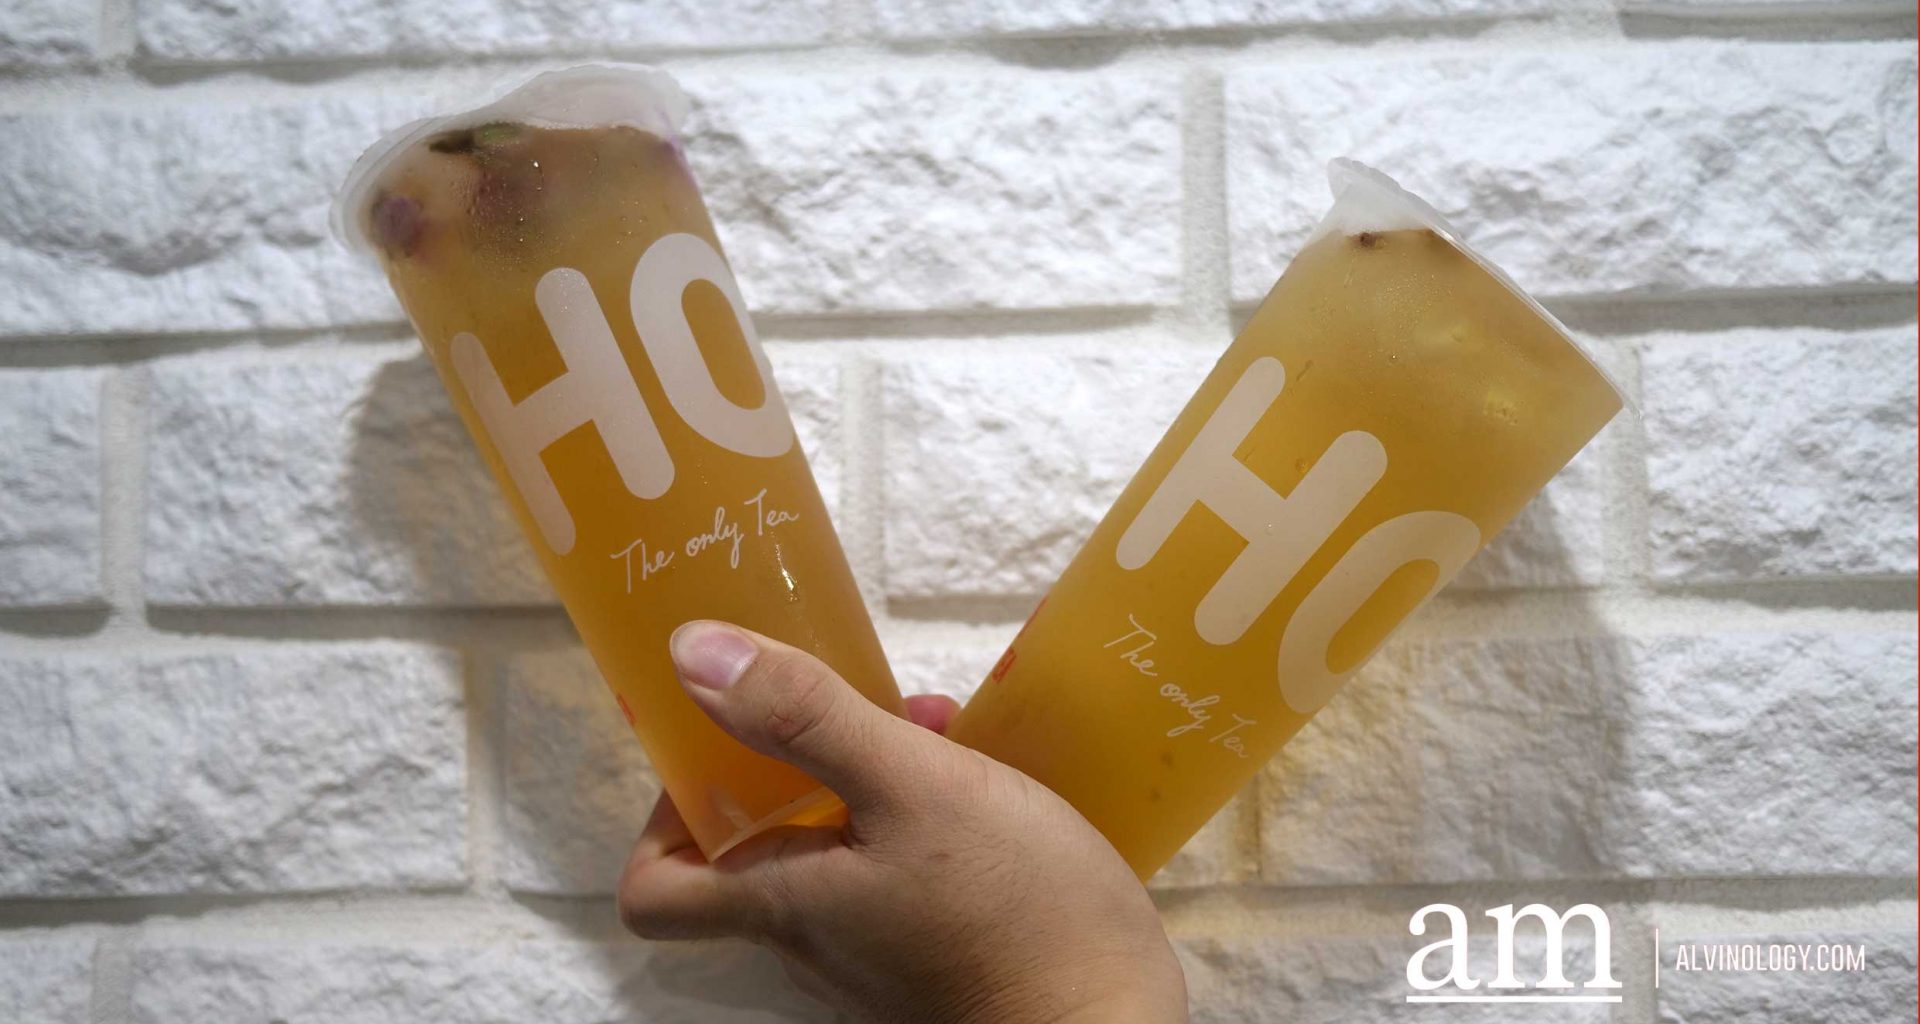 Finally - Sugar, Fat and Calories Free Bubble Tea has Landed in Singapore! Thanks to LiHO TEA - Alvinology